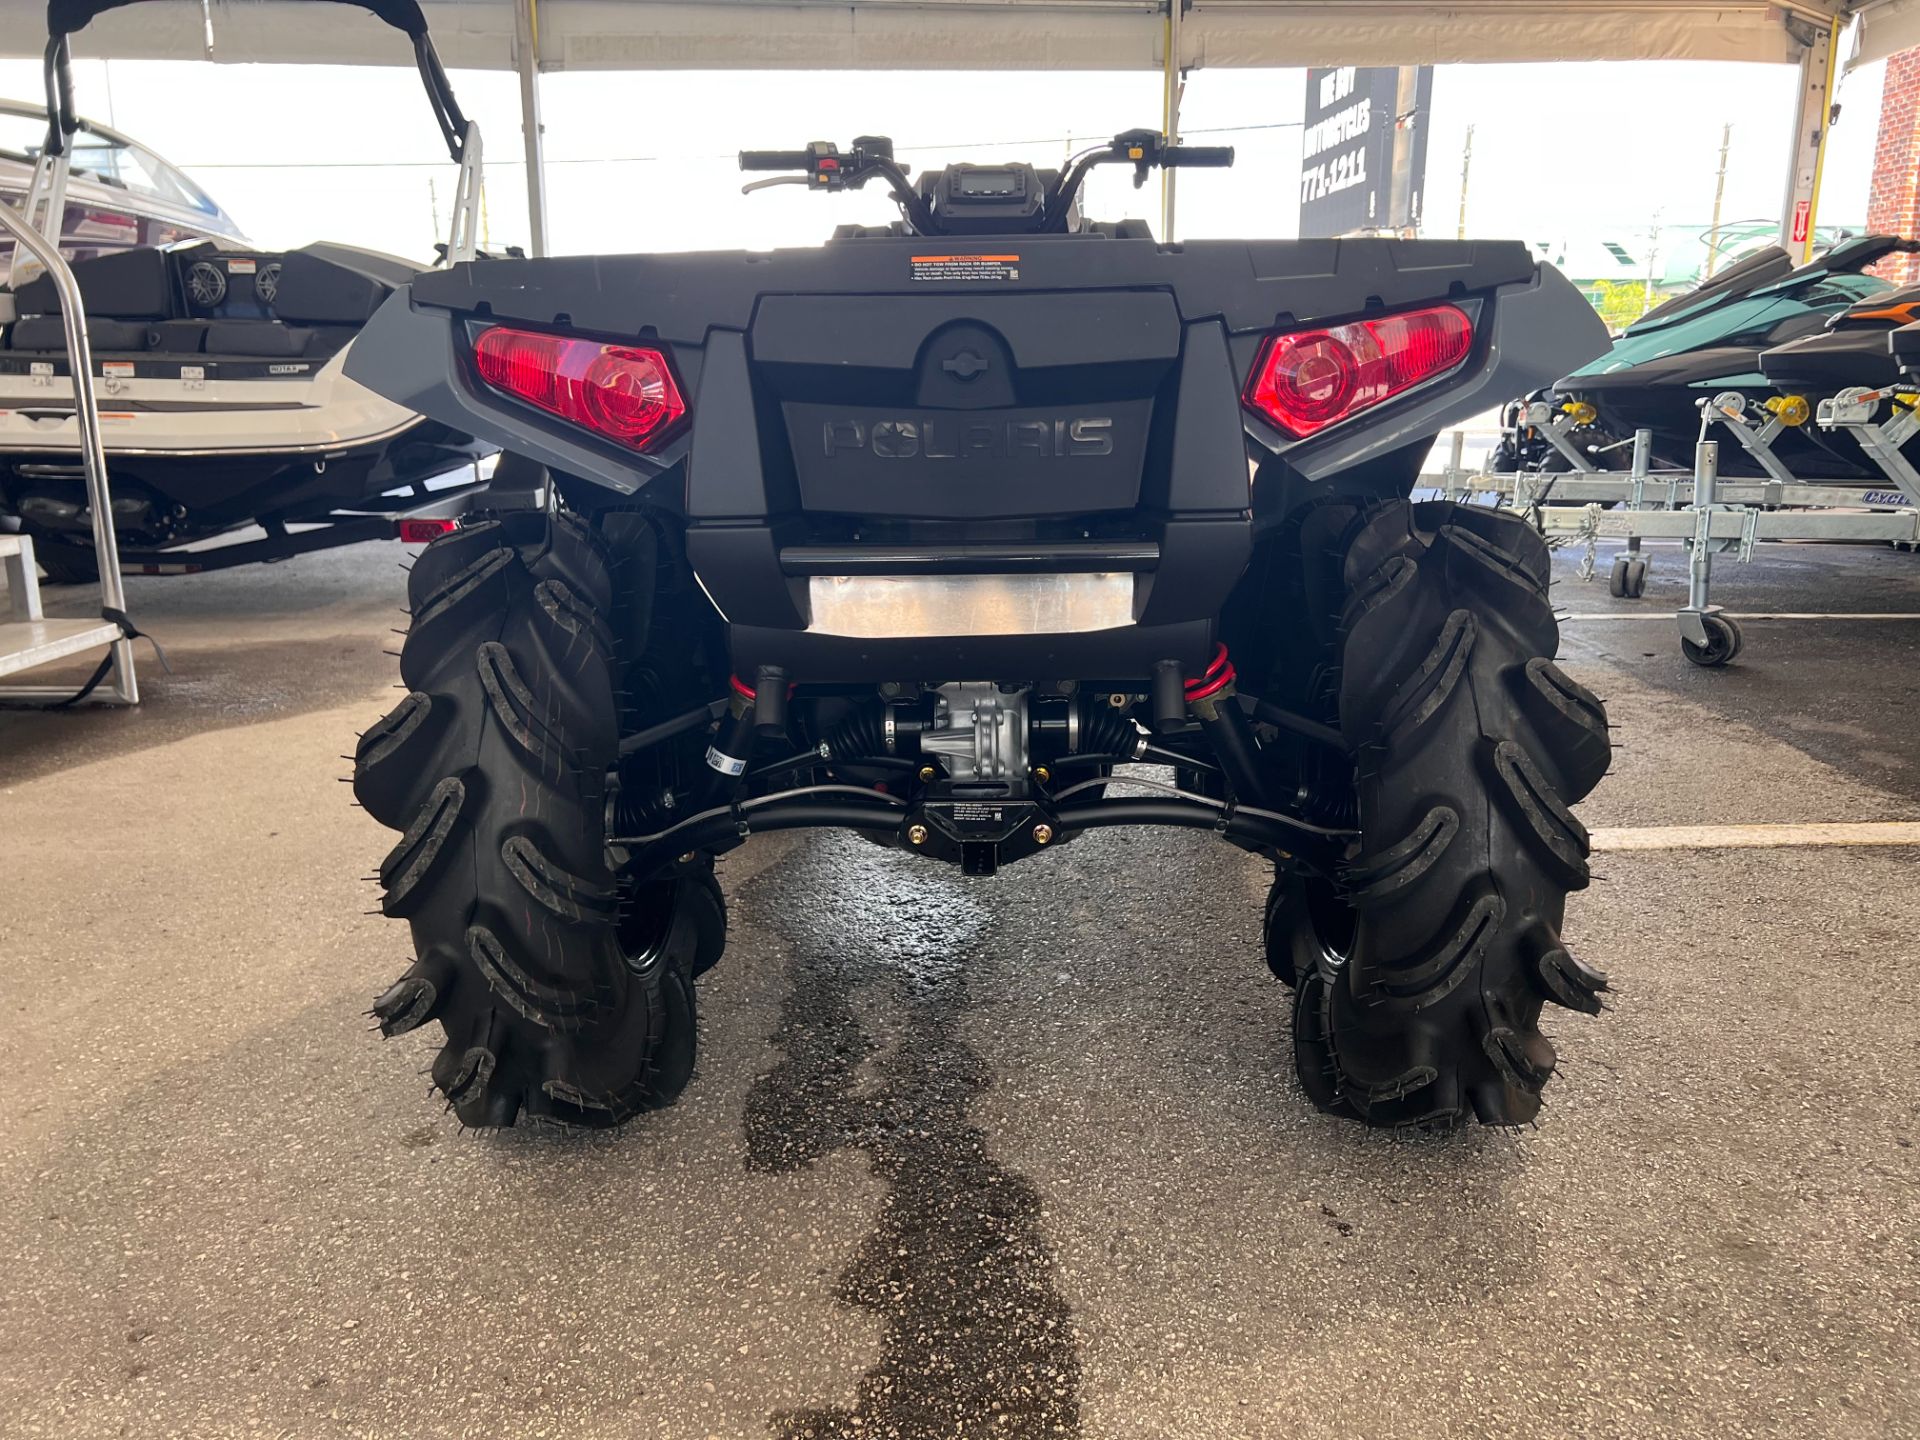 2022 Polaris Sportsman 850 High Lifter Edition in Clearwater, Florida - Photo 8